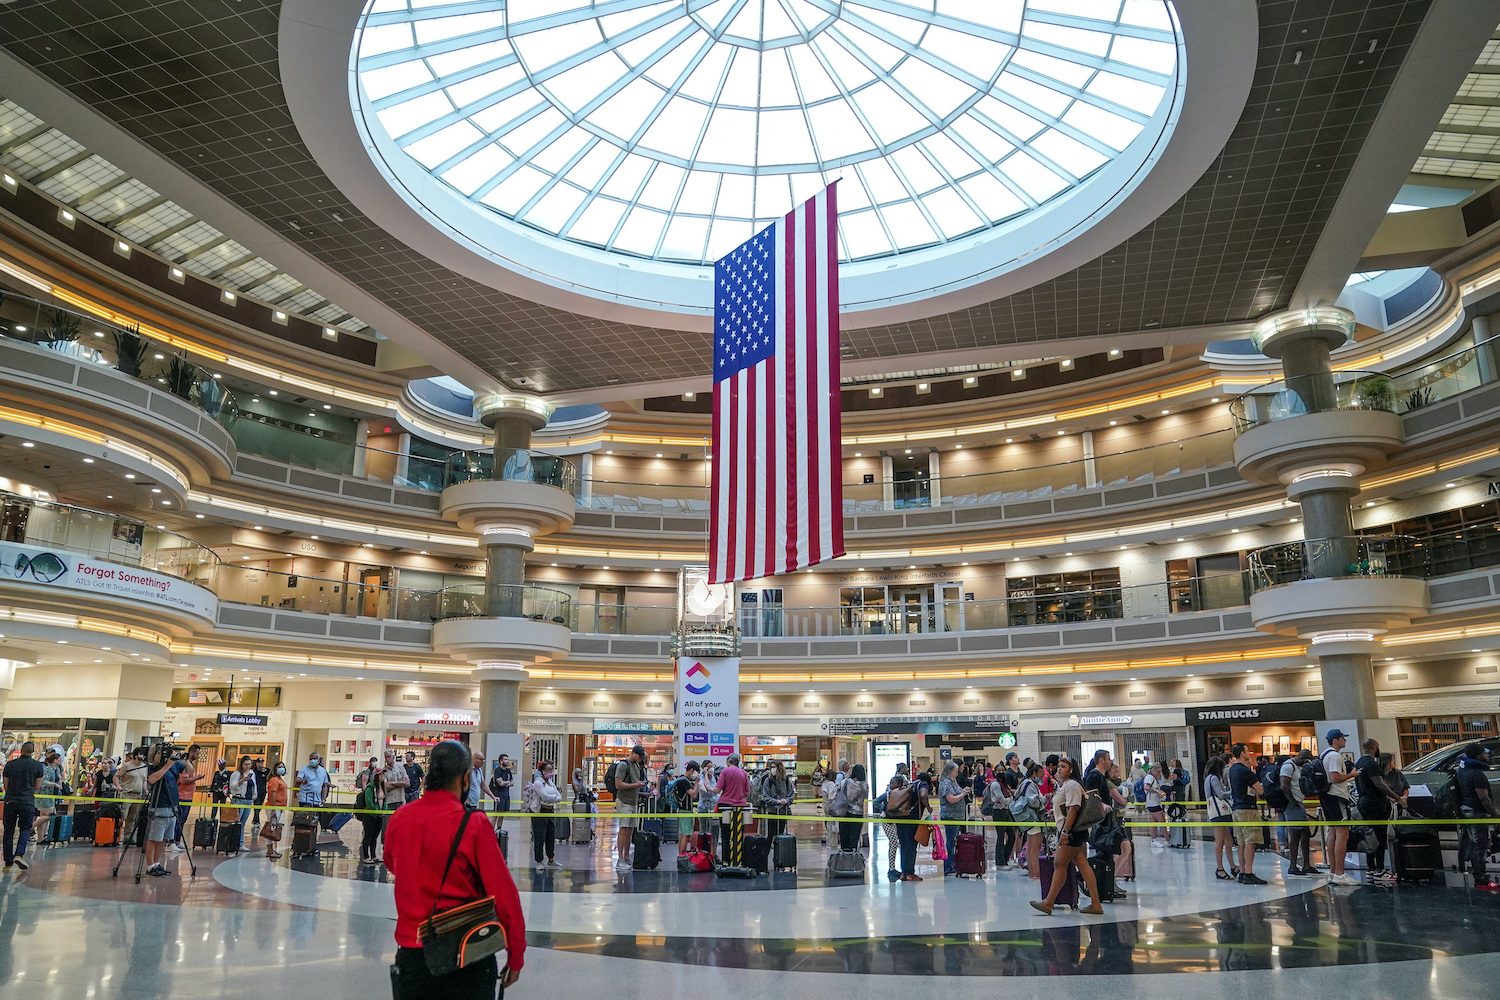 US awards $968.6 million for airport terminal projects